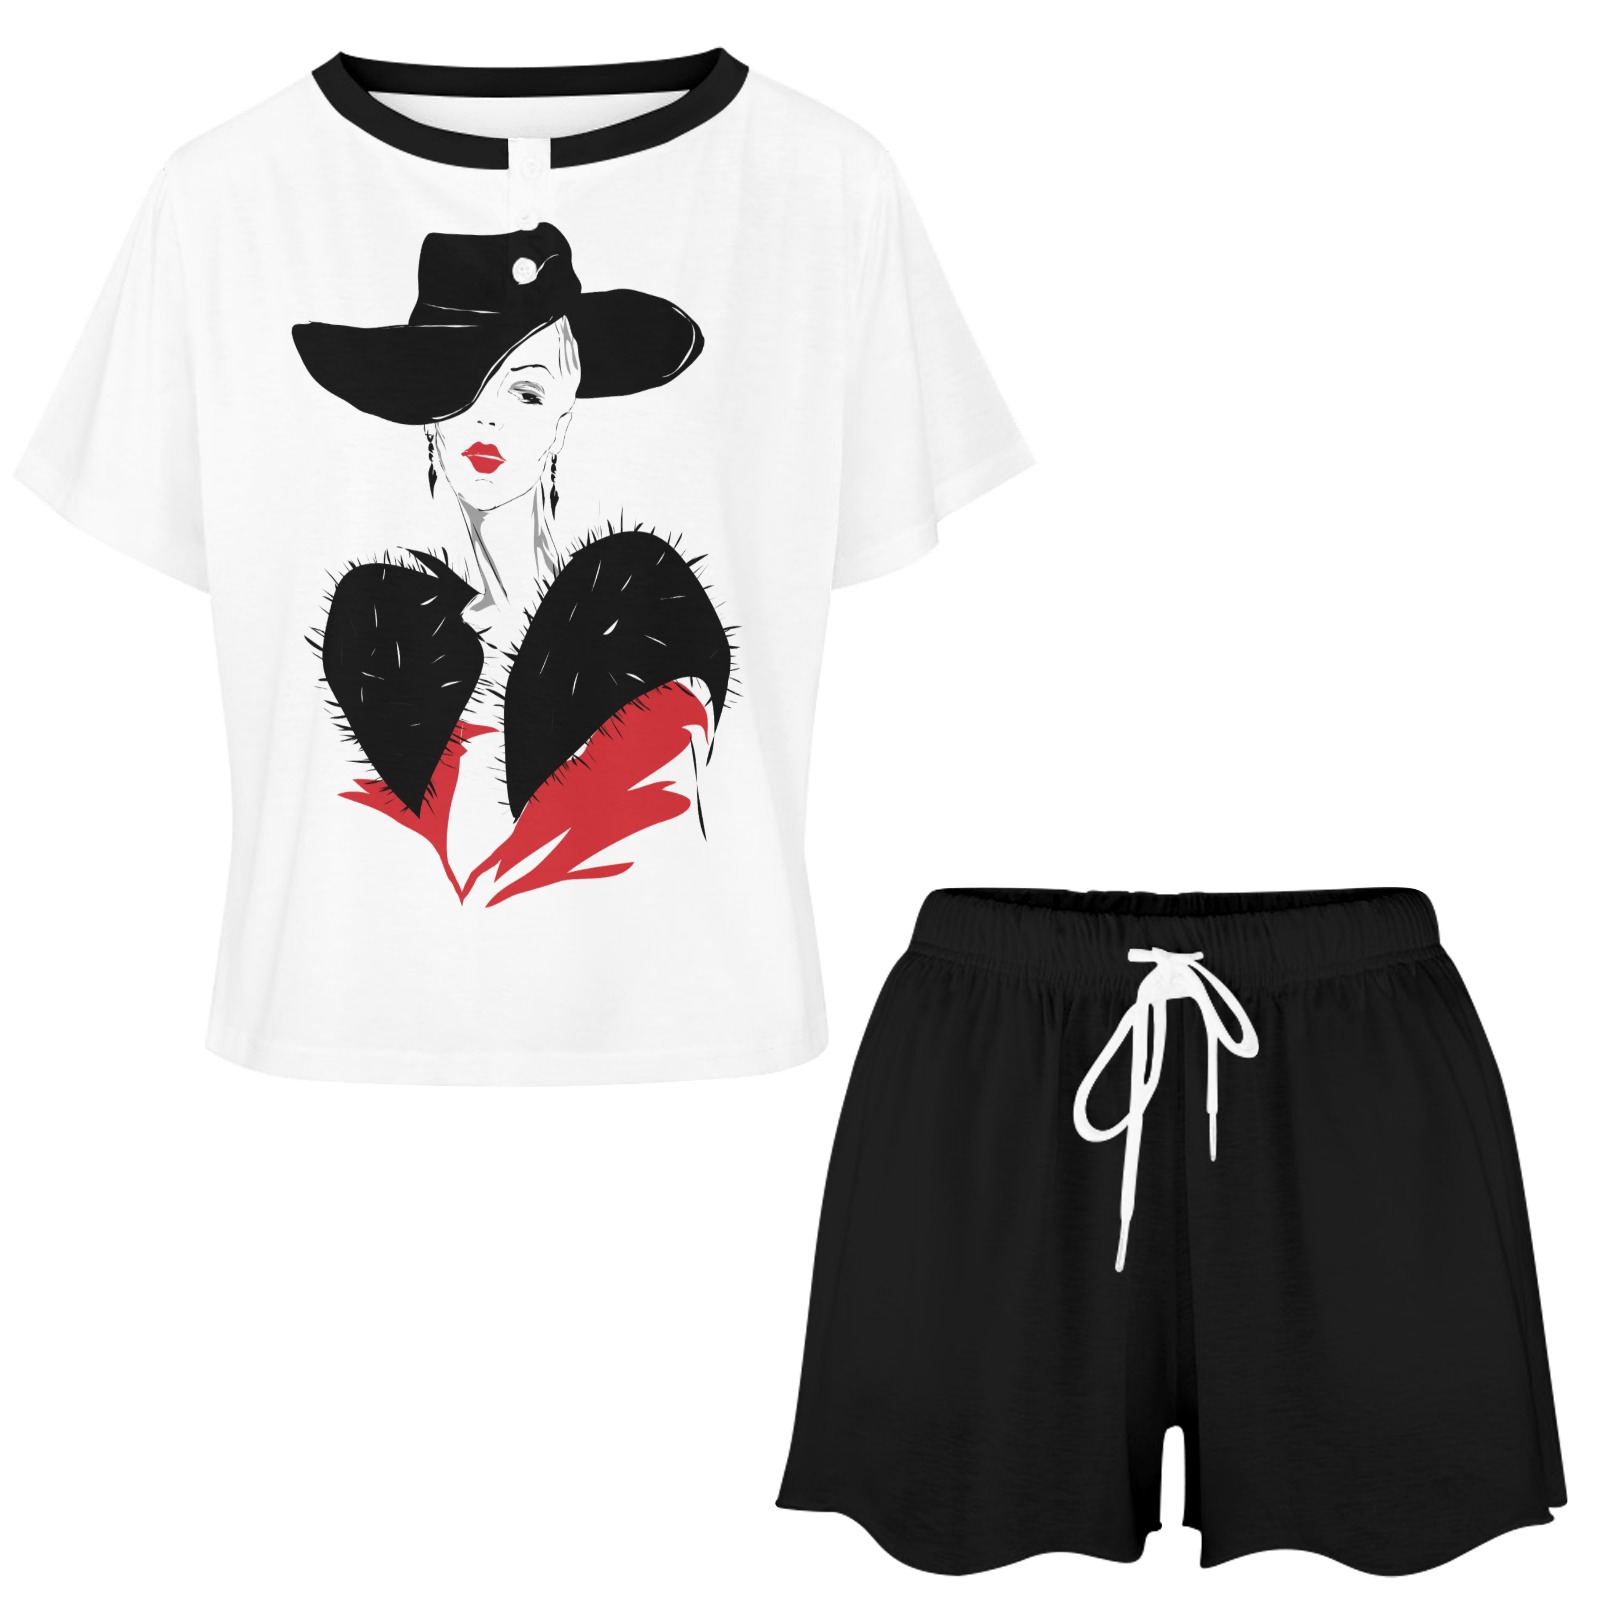 Fashion Plate in a Red Coat and Black Hat Women's Mid-Length Shorts Pajama Set